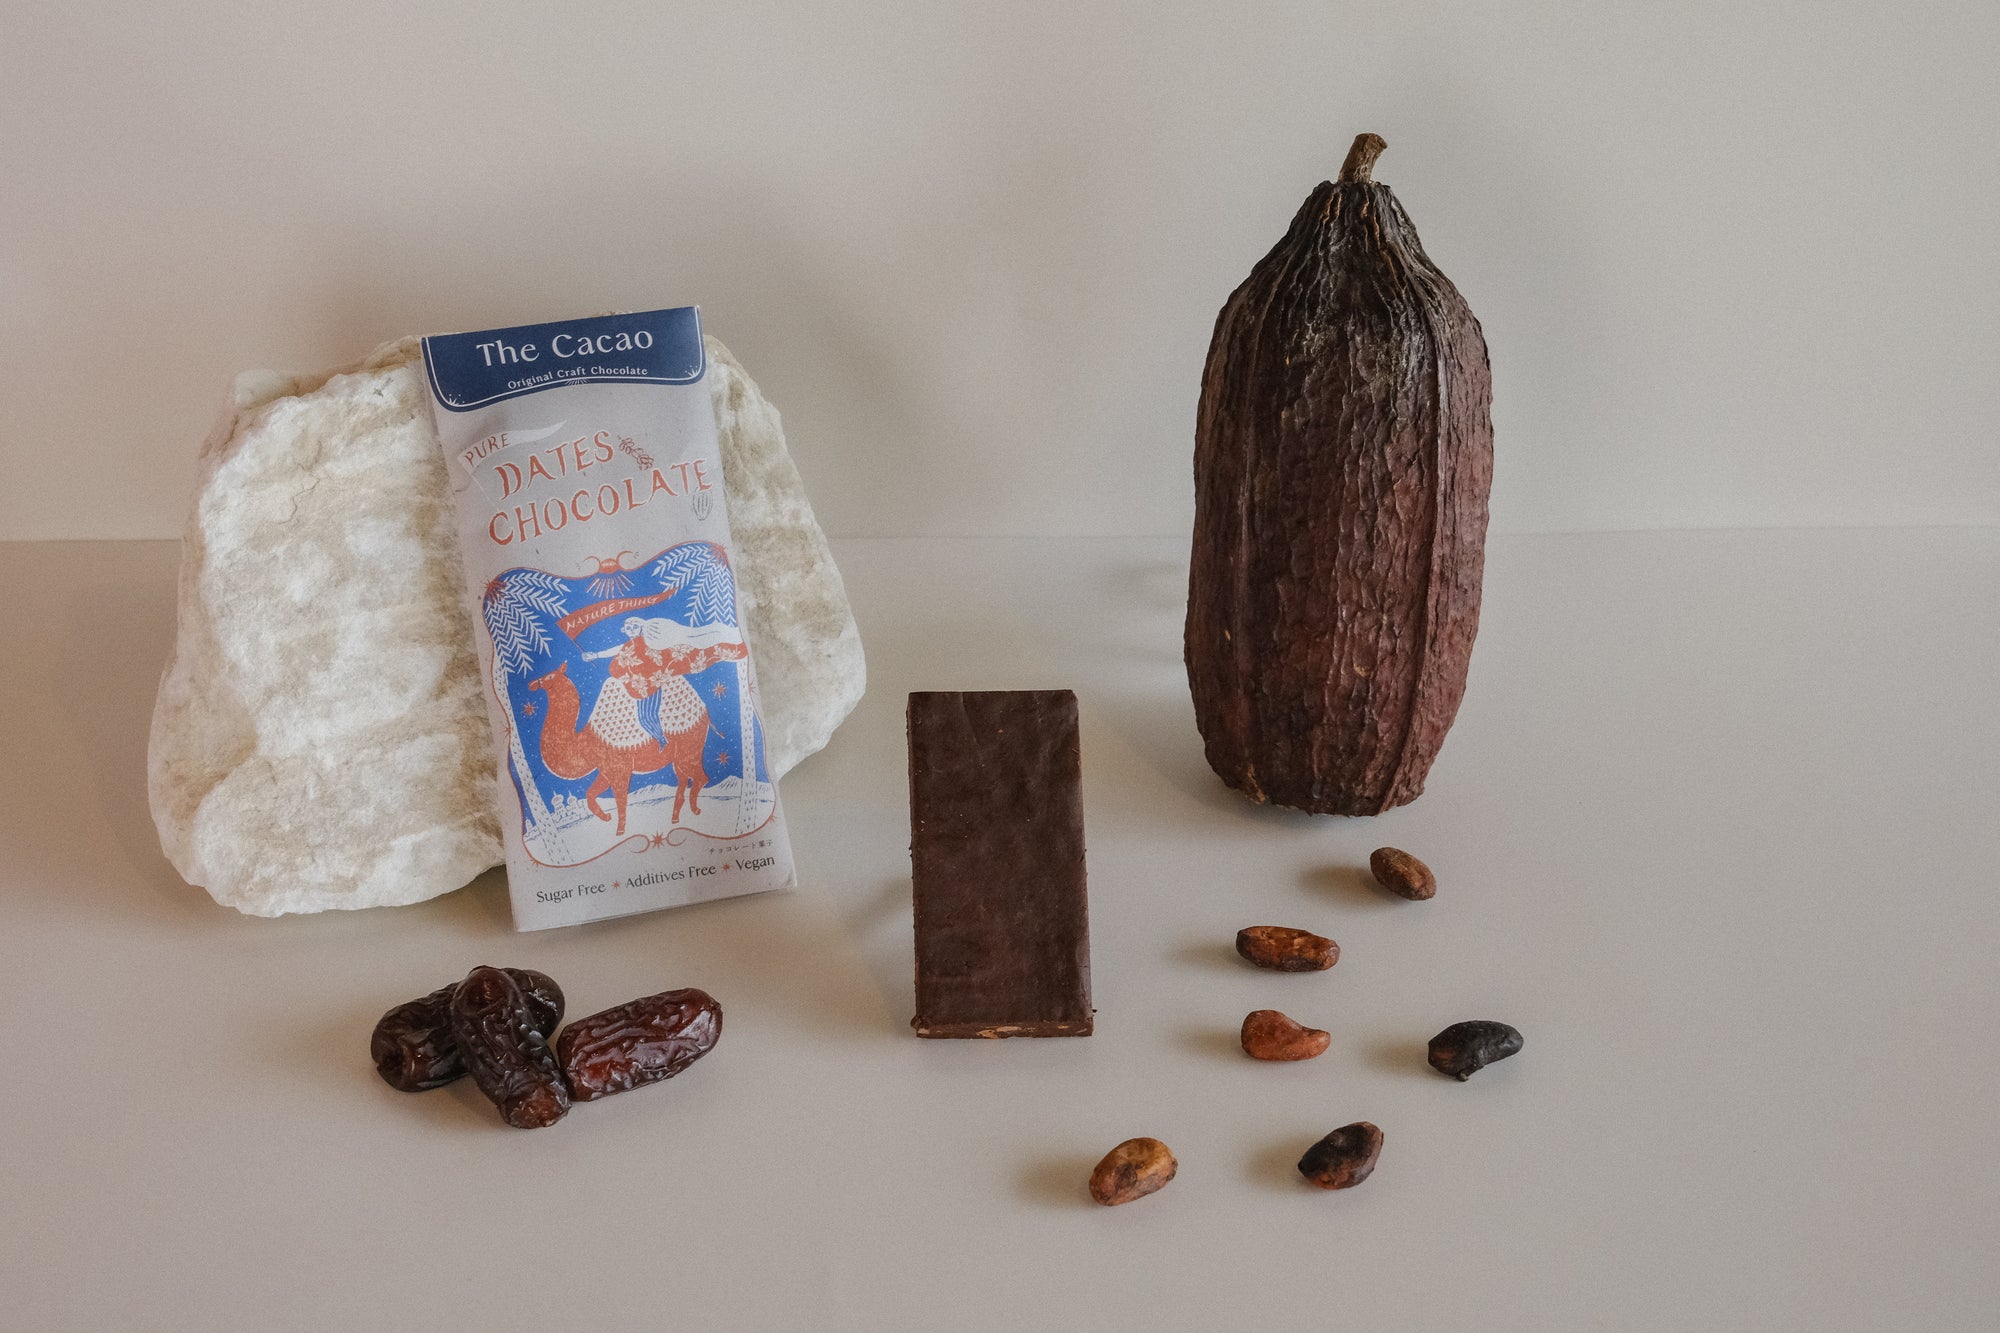 Pure Dates Chocolate / The Cacao